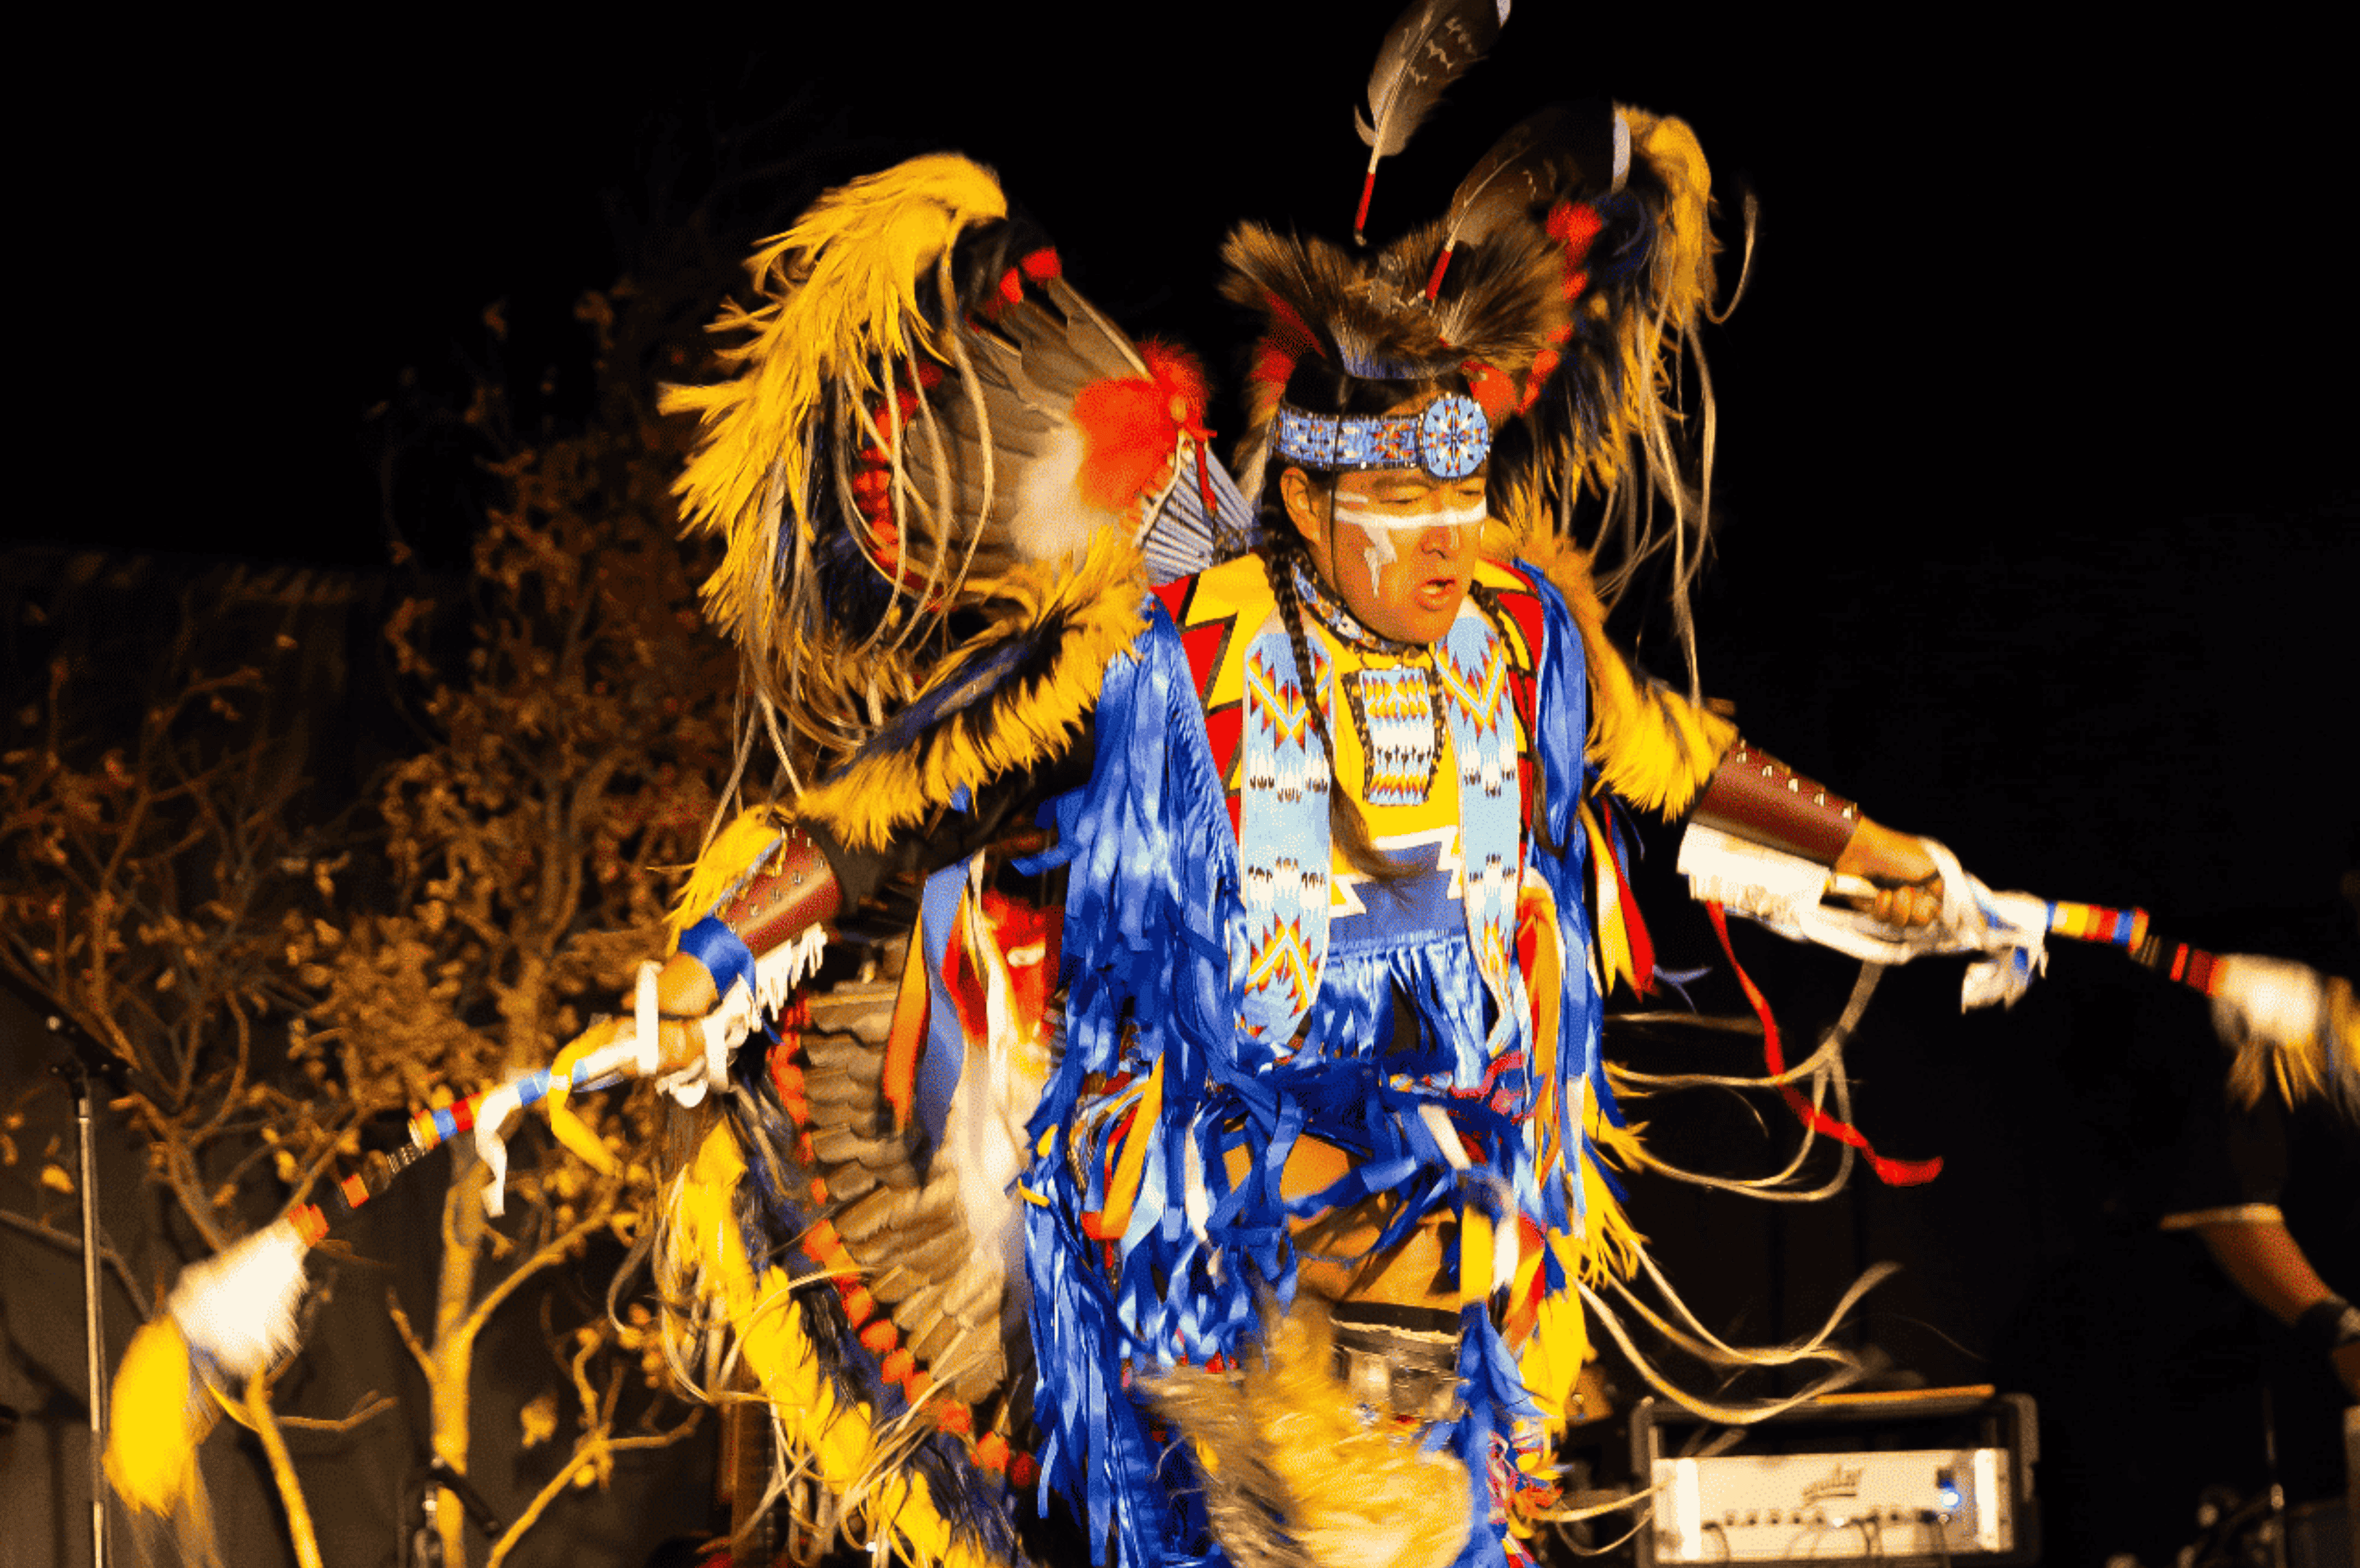 Indigenous person performing a traditional moondance in elaborately feathered costume.